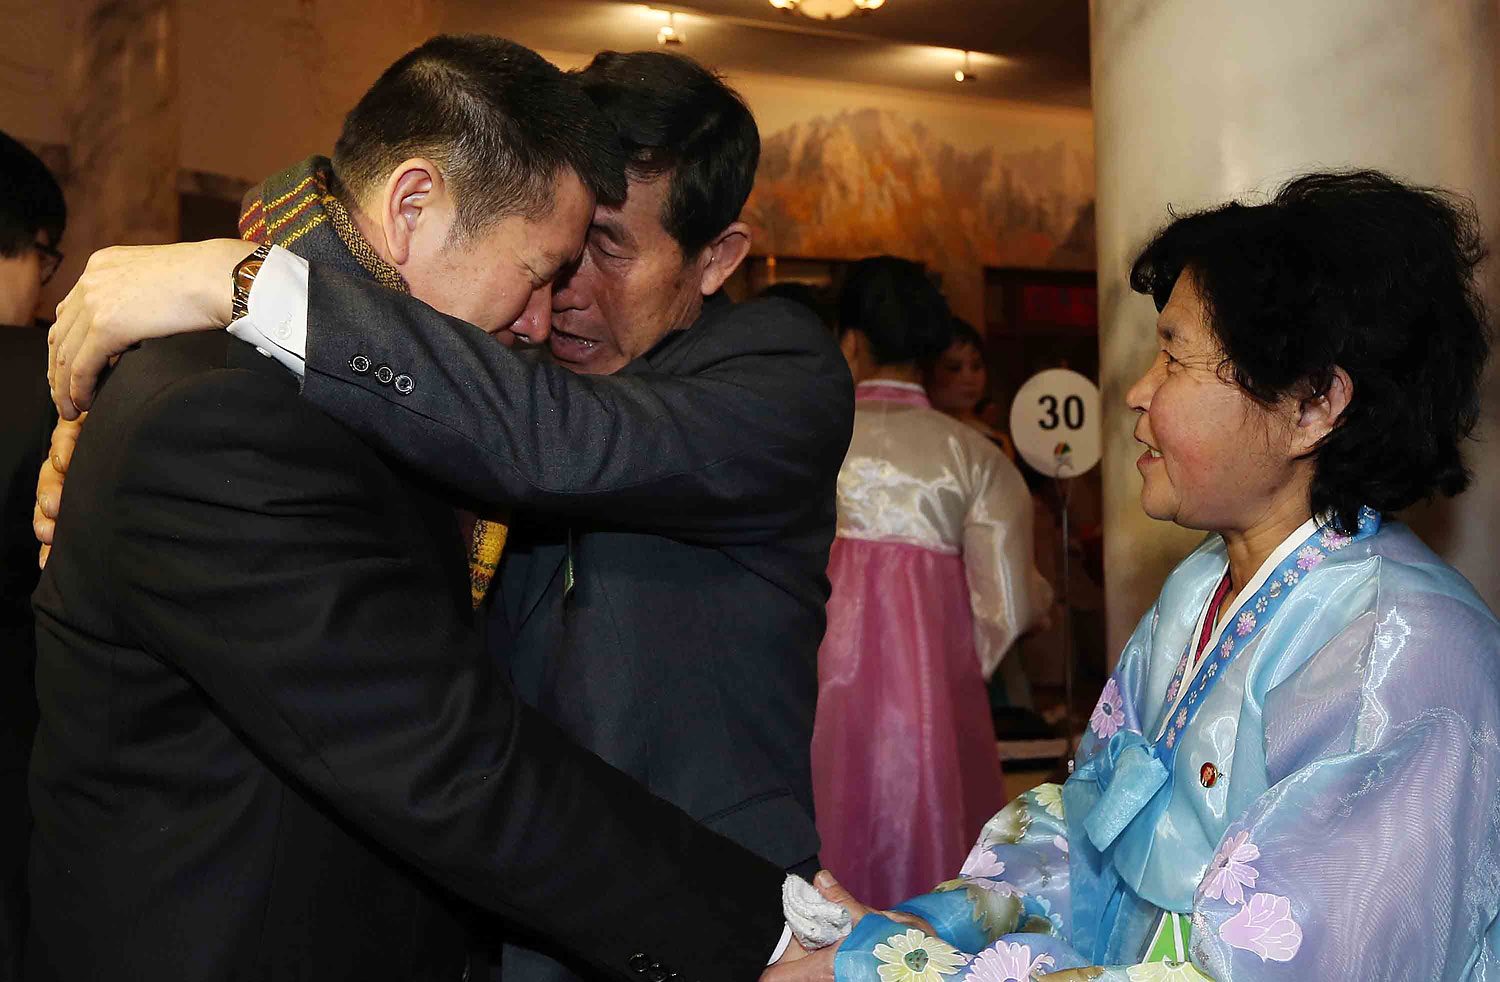 Park Yang-Kon of South Korea bids farewell to his brother Park Yang-Soo of North Korea as he prepares to depart the North Korean resort area of Mount Kumgang on the third and final day of the first group's family reunion on Feb. 22, 2014.